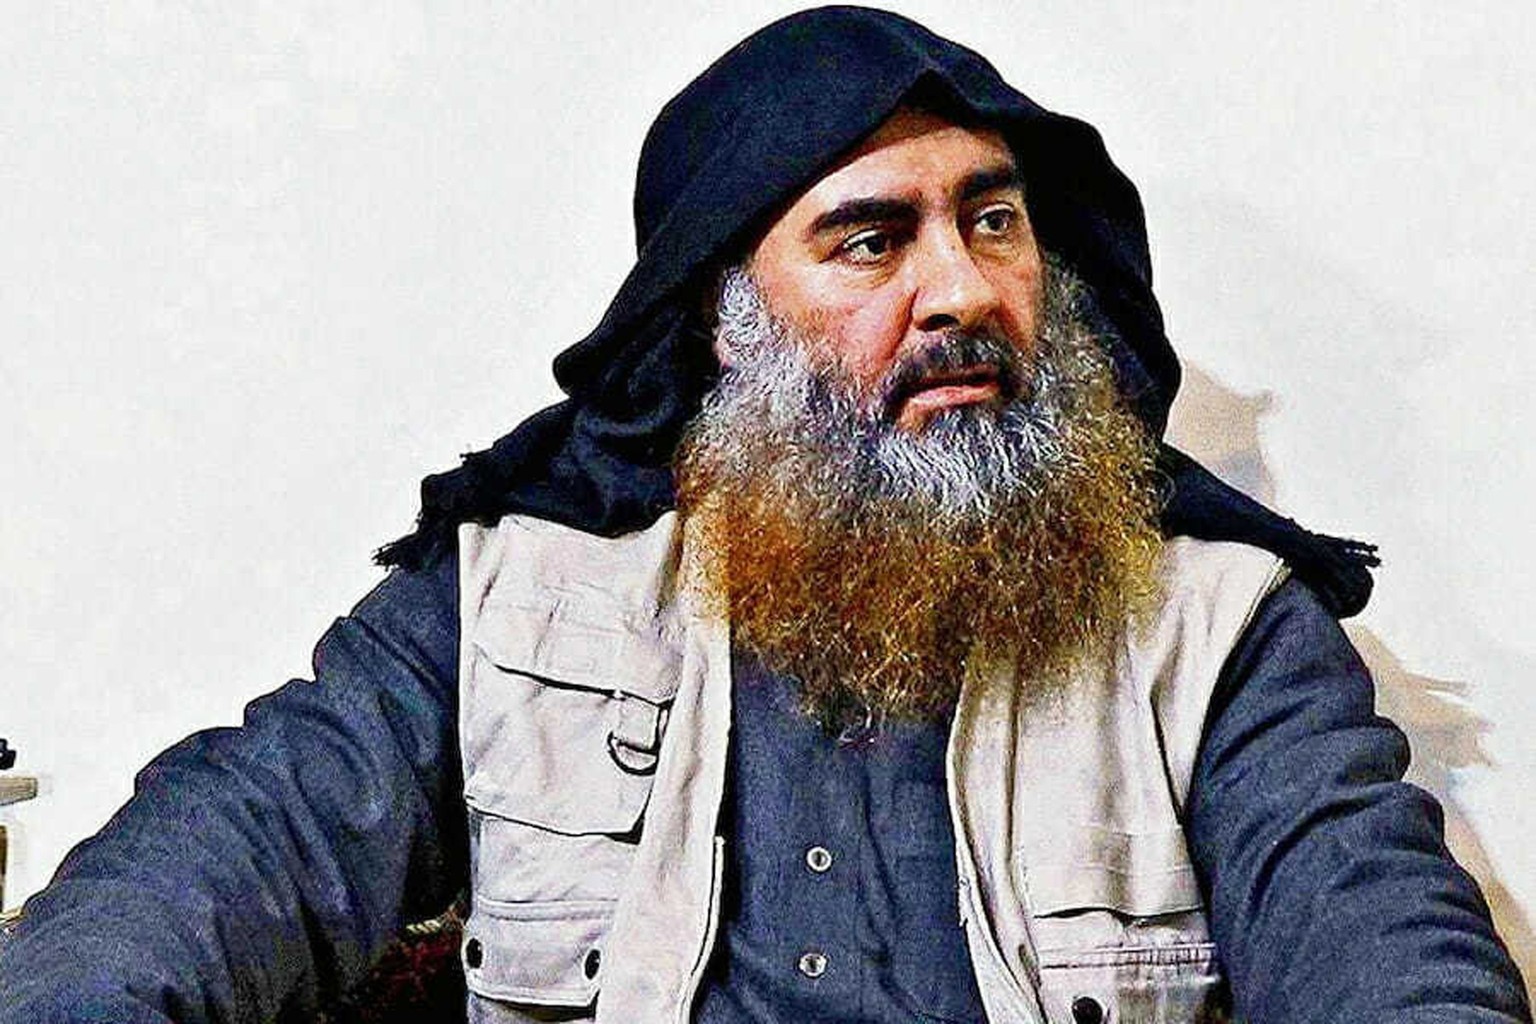 epa07971238 An undated handout photo made available by the US Department of Defense (DOD) shows Abu Bakr Al-Baghdadi, who was the Iraqi-born leader of the so-called Islamic State in Iraq and Syria (IS ...